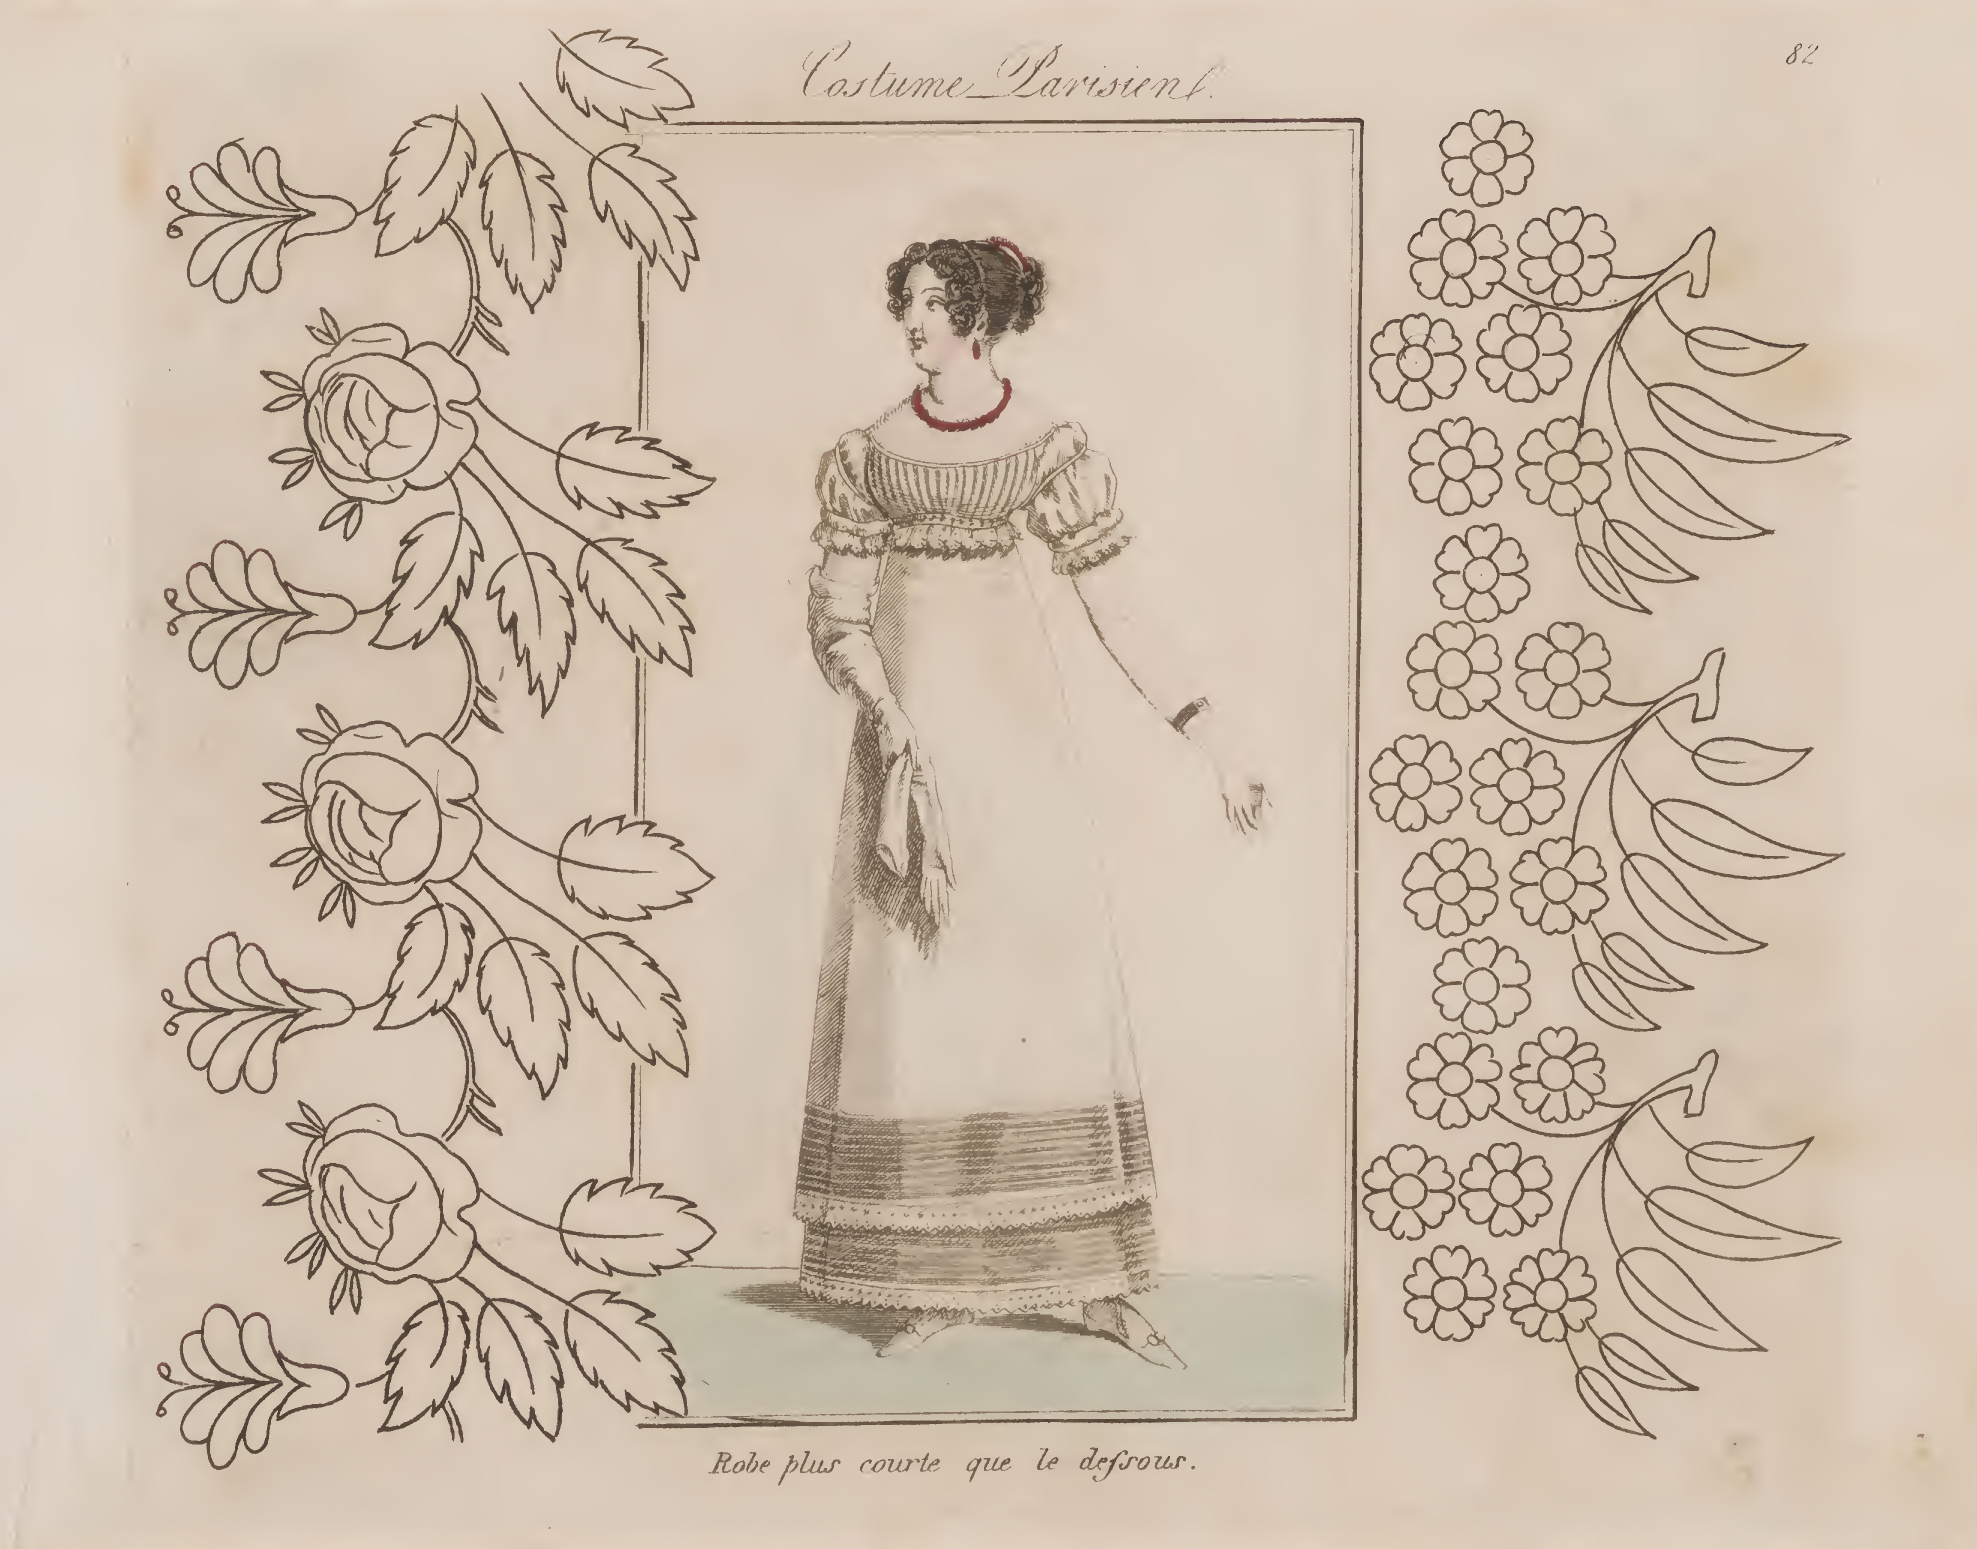 More Vintage Embroidery Patterns with Fashion Illustrations - The ...